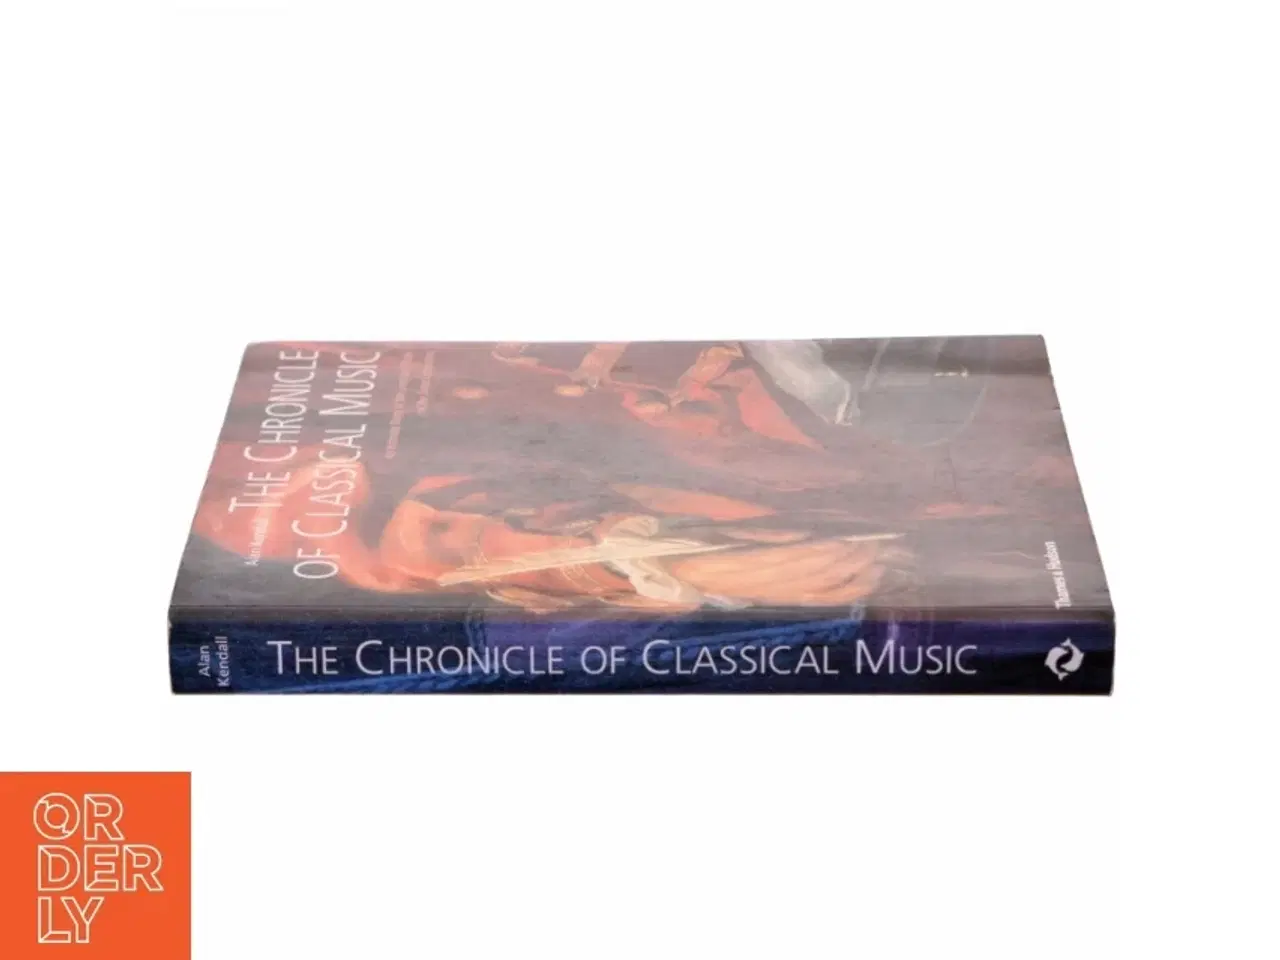 Billede 2 - The chronicle of classical music : an intimate diary of the lives and music of the great composers af Alan Kendall (Bog)